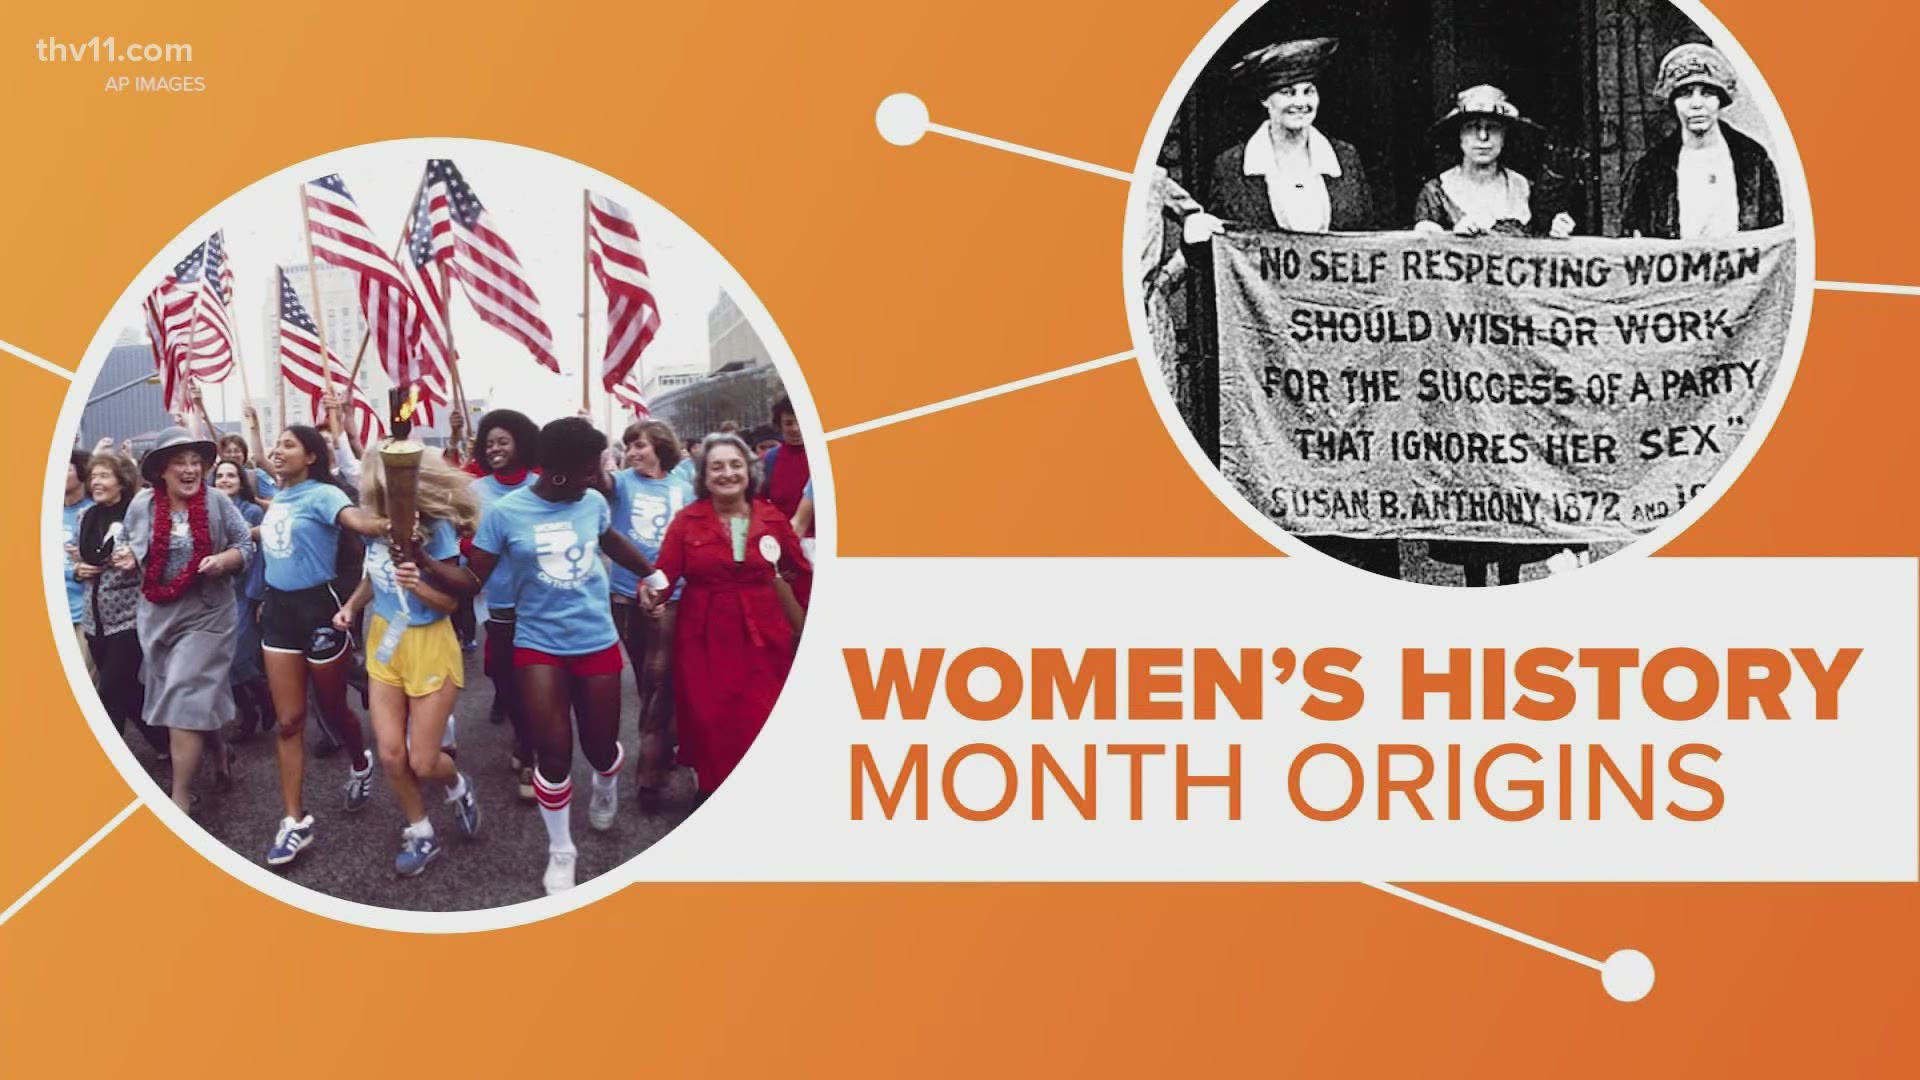 In case you didn't know, march is women's history month, and it's origins date back to most of our lifetimes.